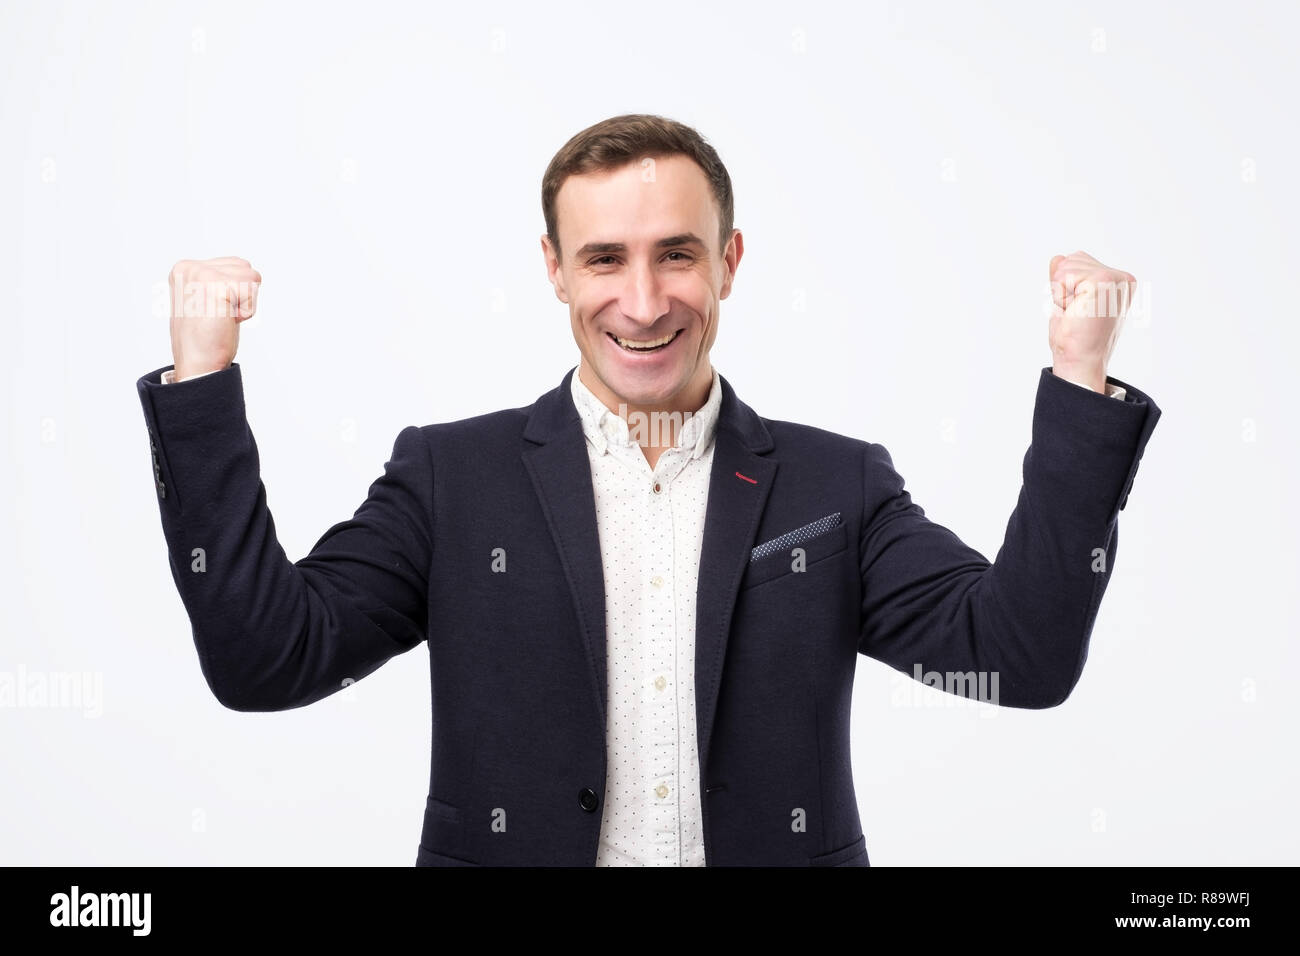 Pleased and happy young italian man is smiling broadly and showing victory sign with both hands. Stock Photo